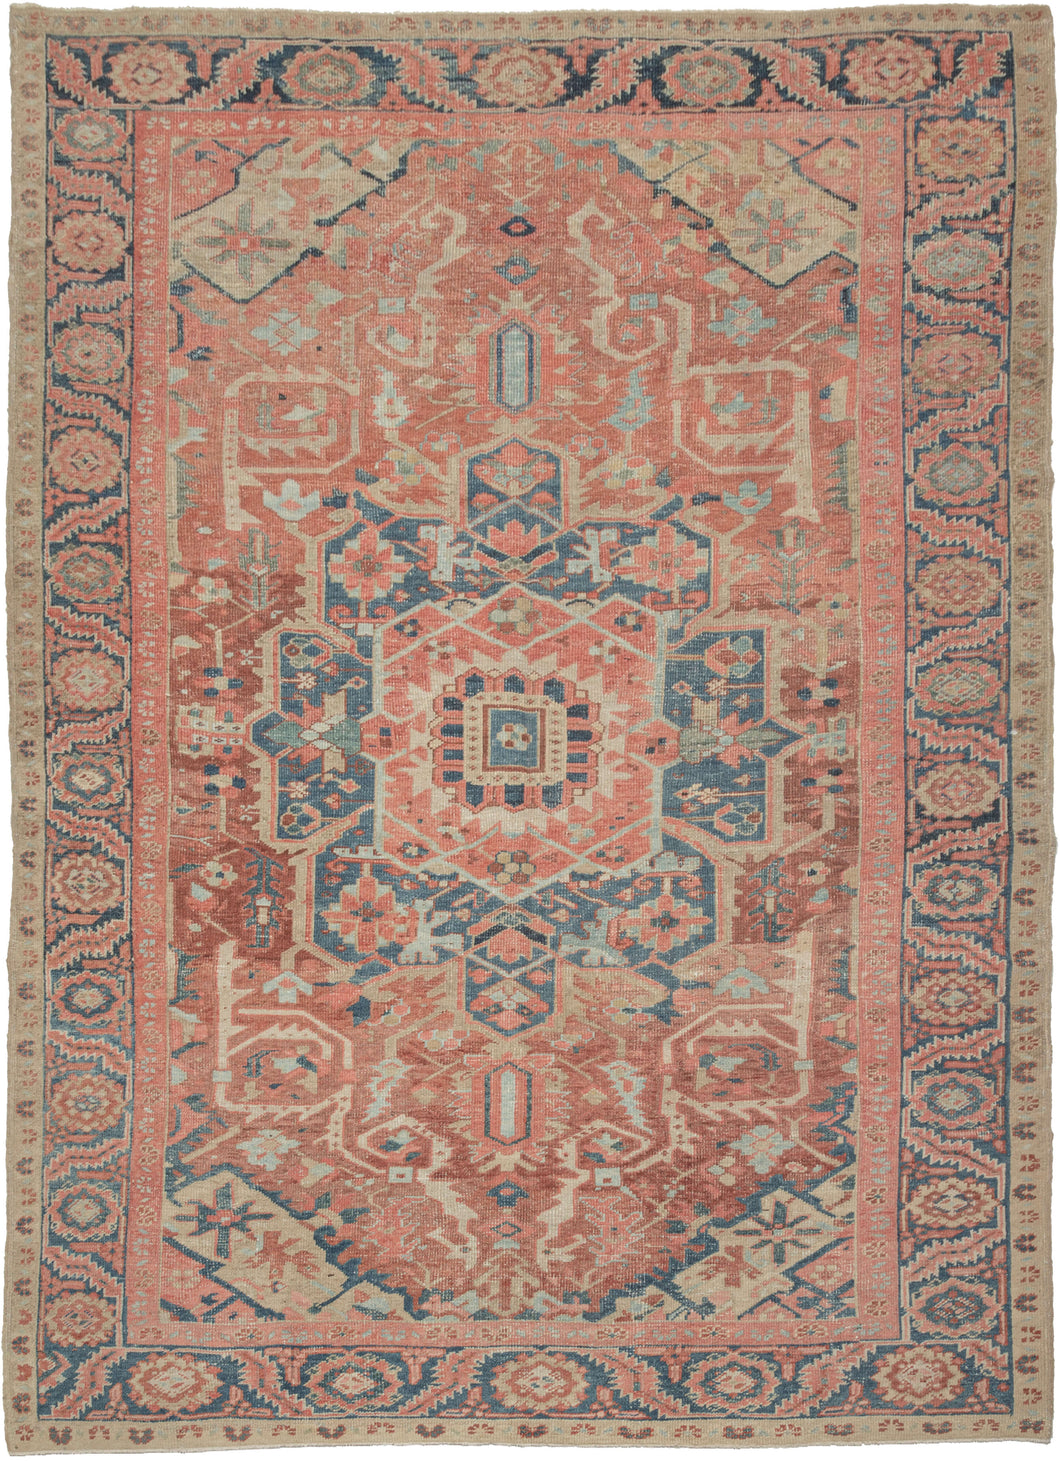 This Baby Serapi Rug features a classic Heriz patterning with a geometric central medallion on a patinated red ground. The four cornices mirror the design from the medallion in a different color combination.